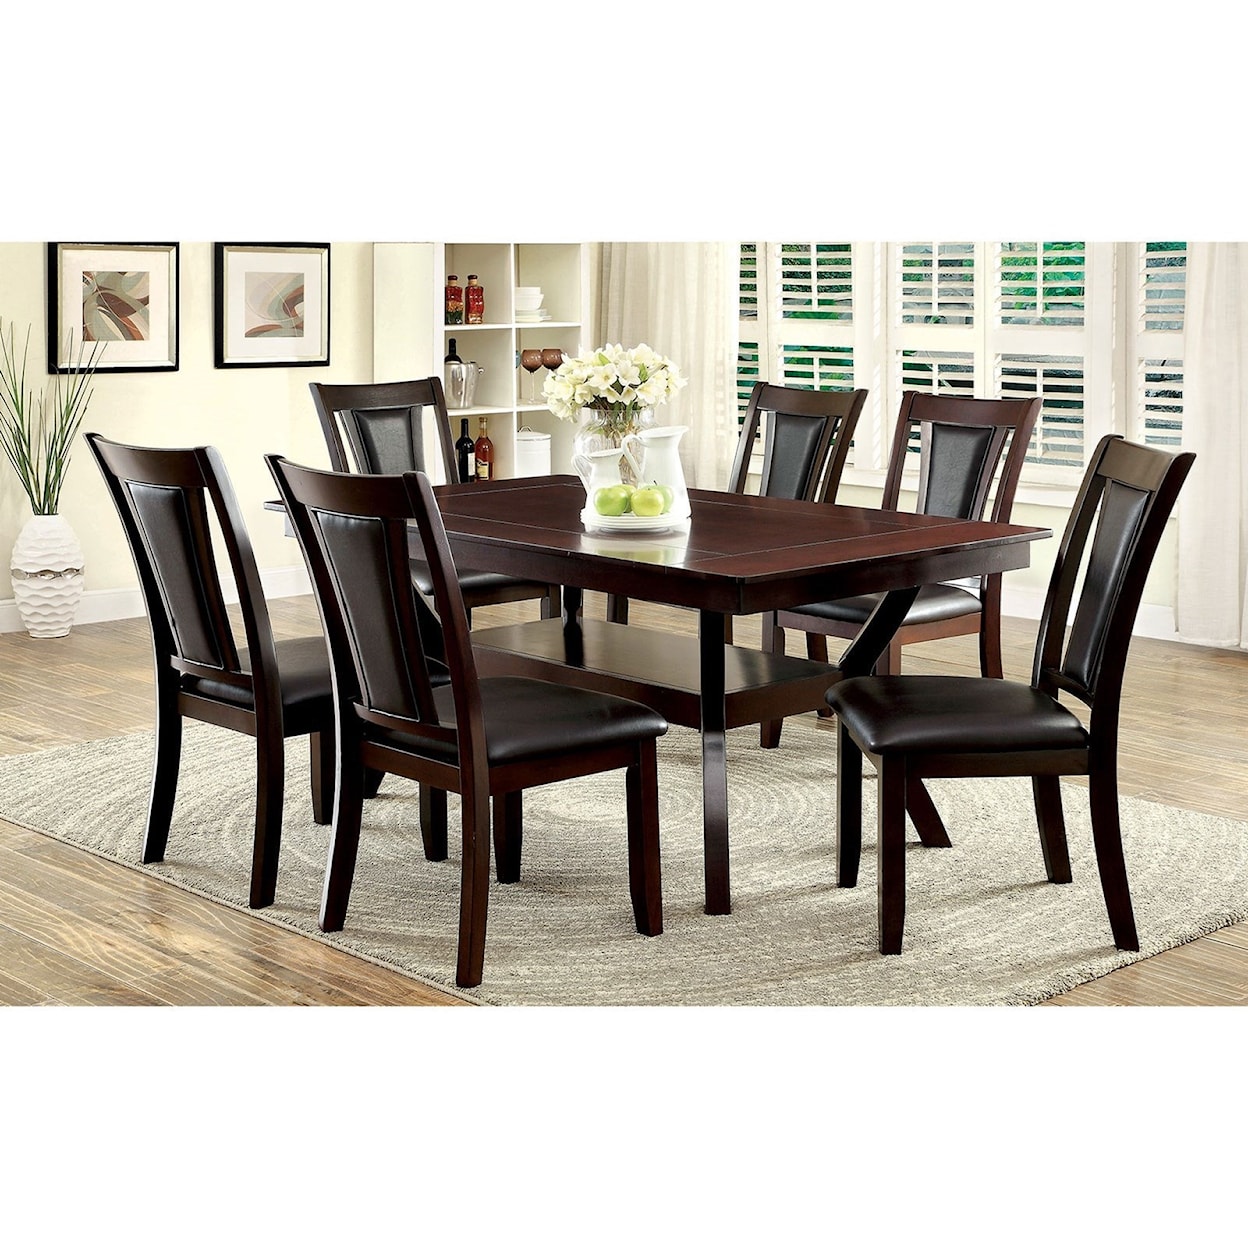 Furniture of America Brent 7 Pc Dining Set